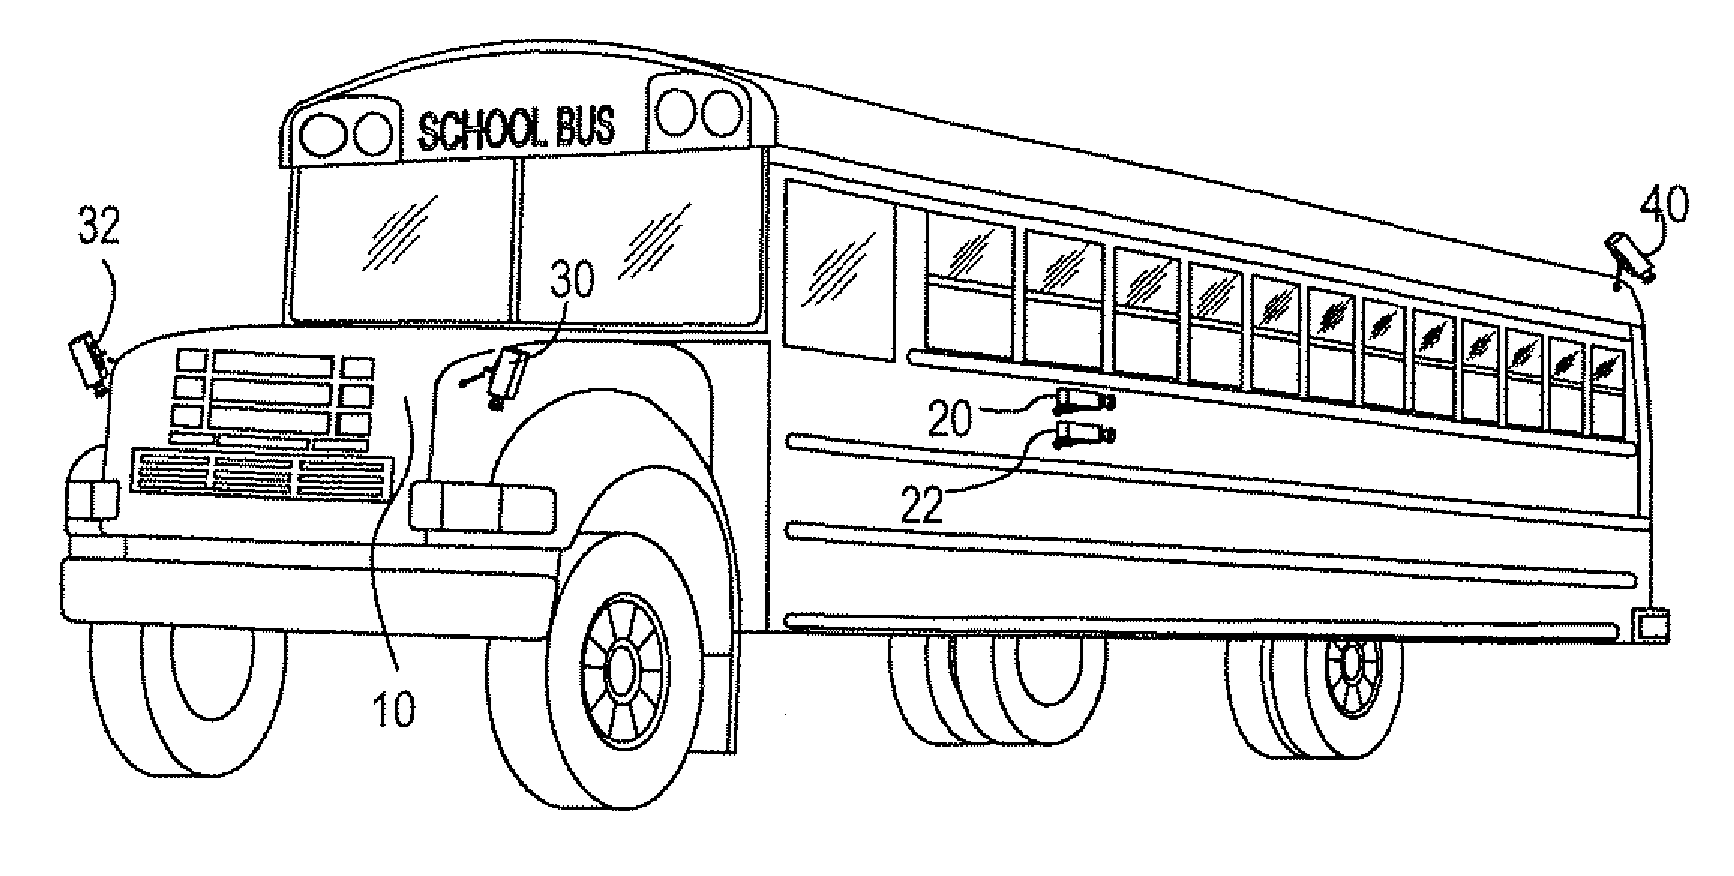 Video Monitoring System For School Buses